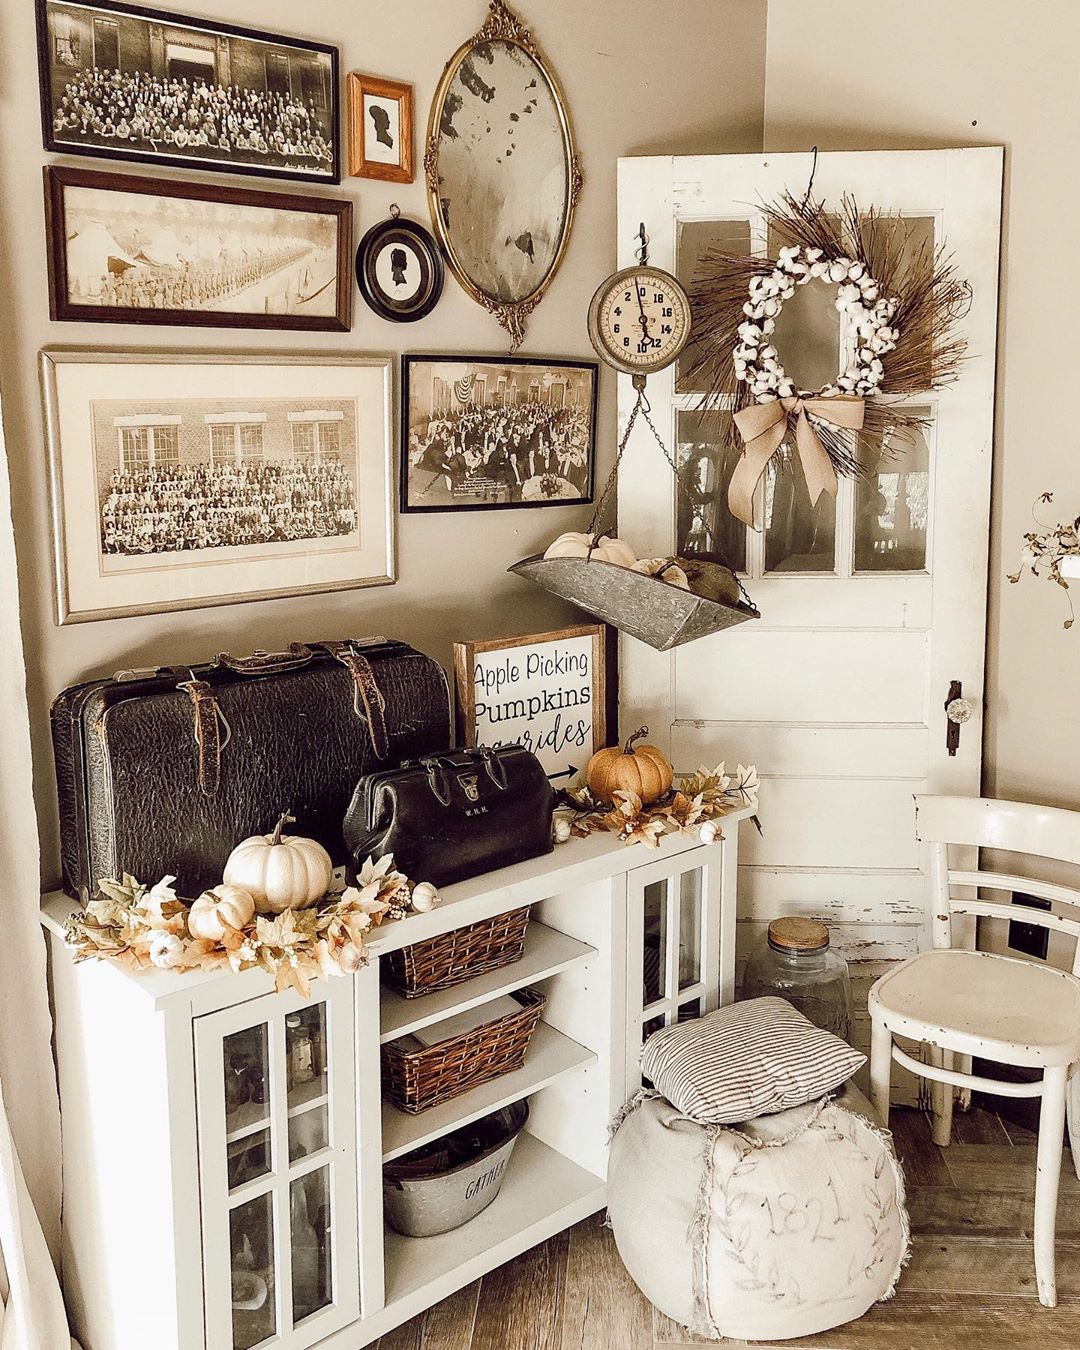 Vintage Decor Ideas to Get the Look on a Budget